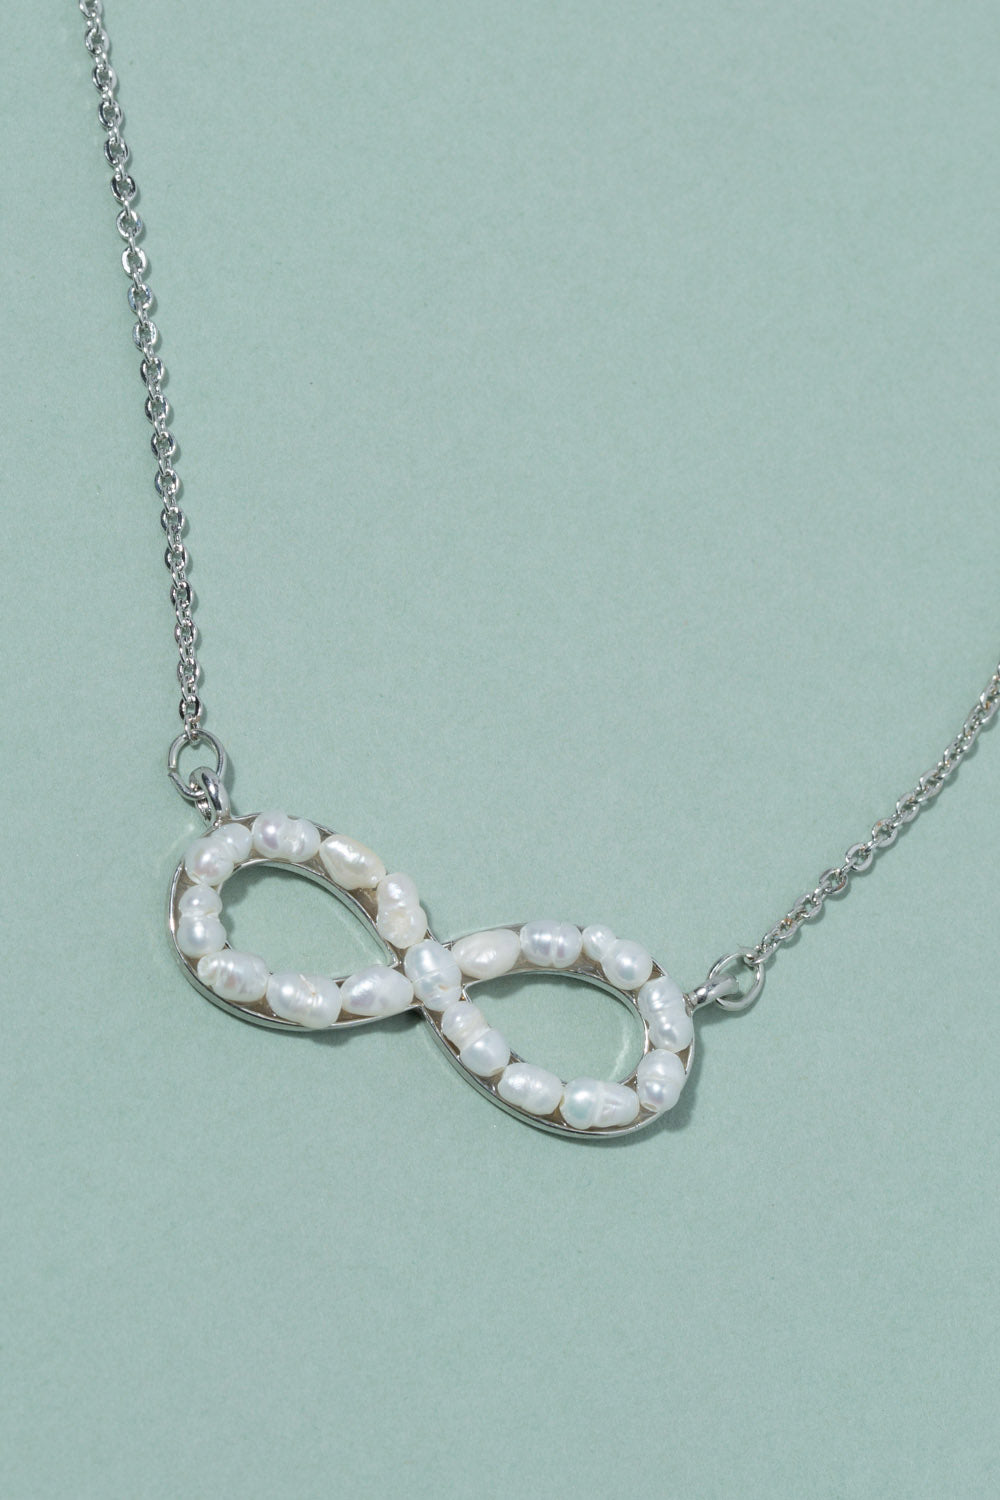 Type 2 Infinite Connection Necklace